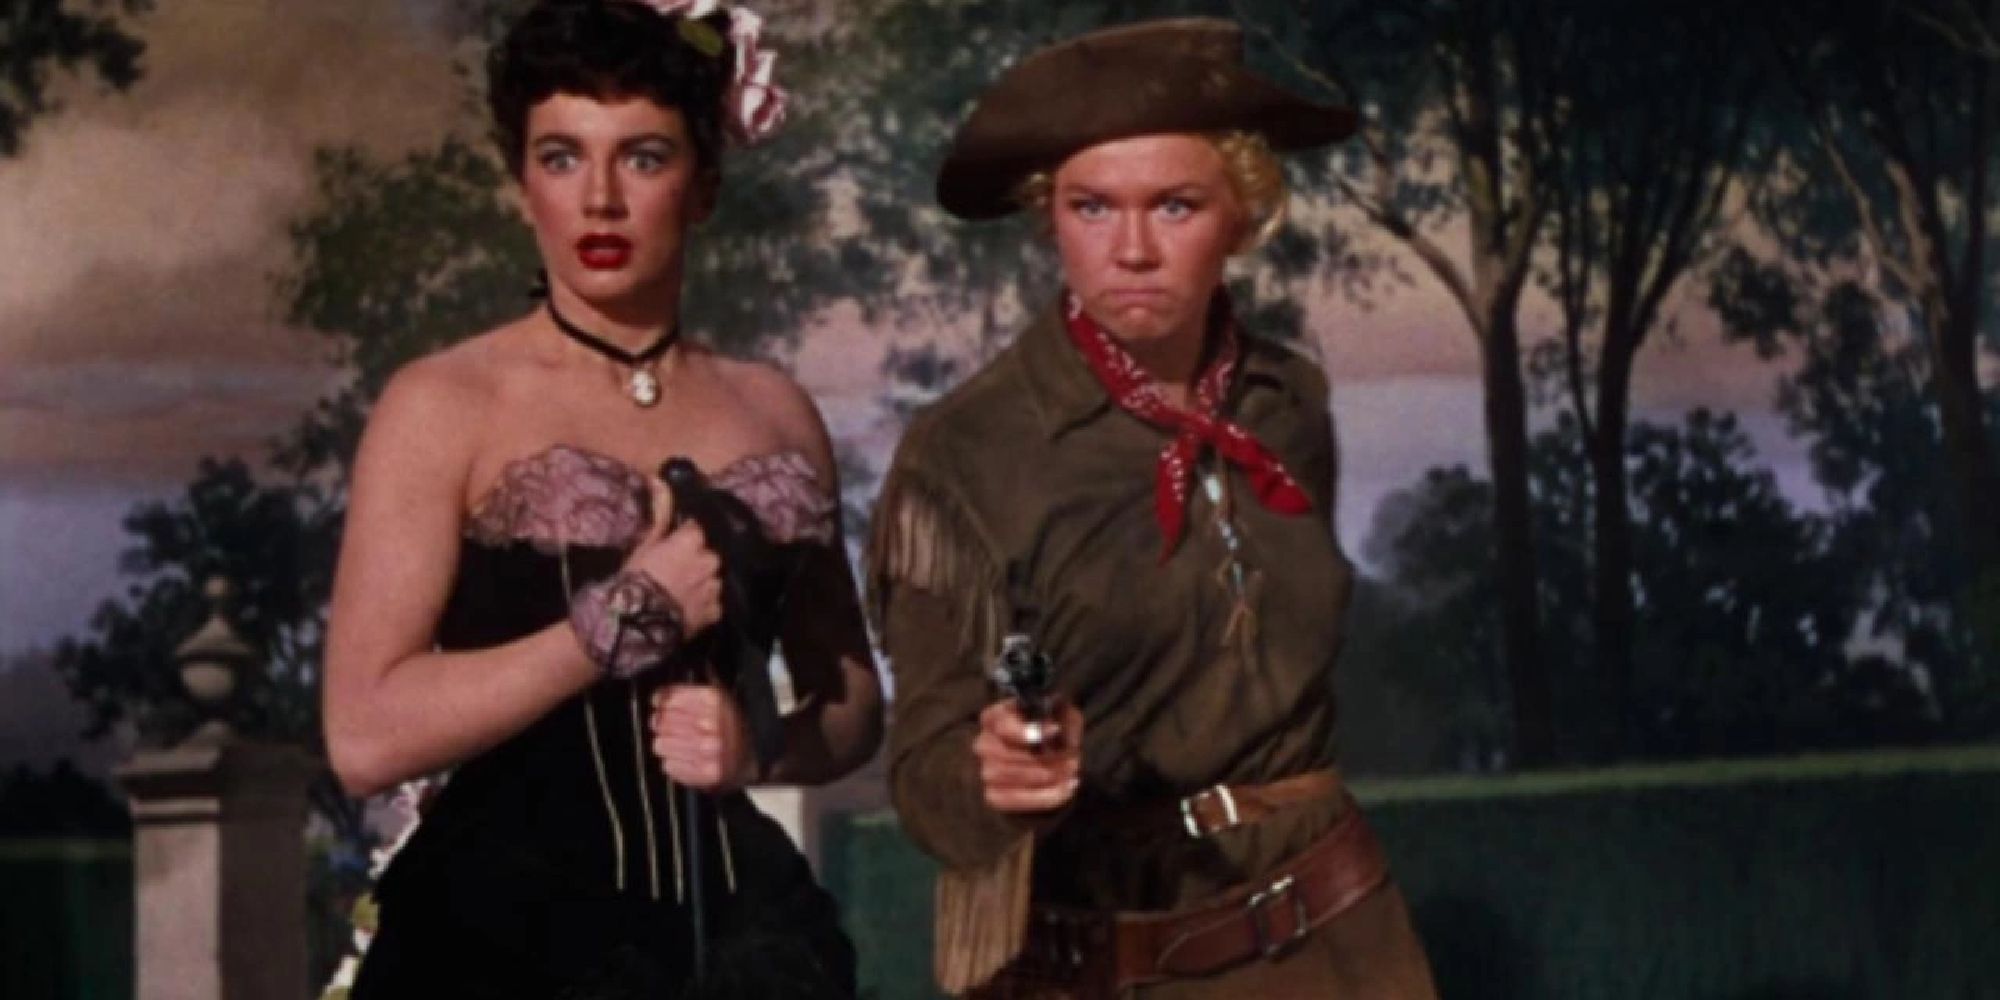 Doris Day wielding a gun with a showgirl by her side in Calamity Jane